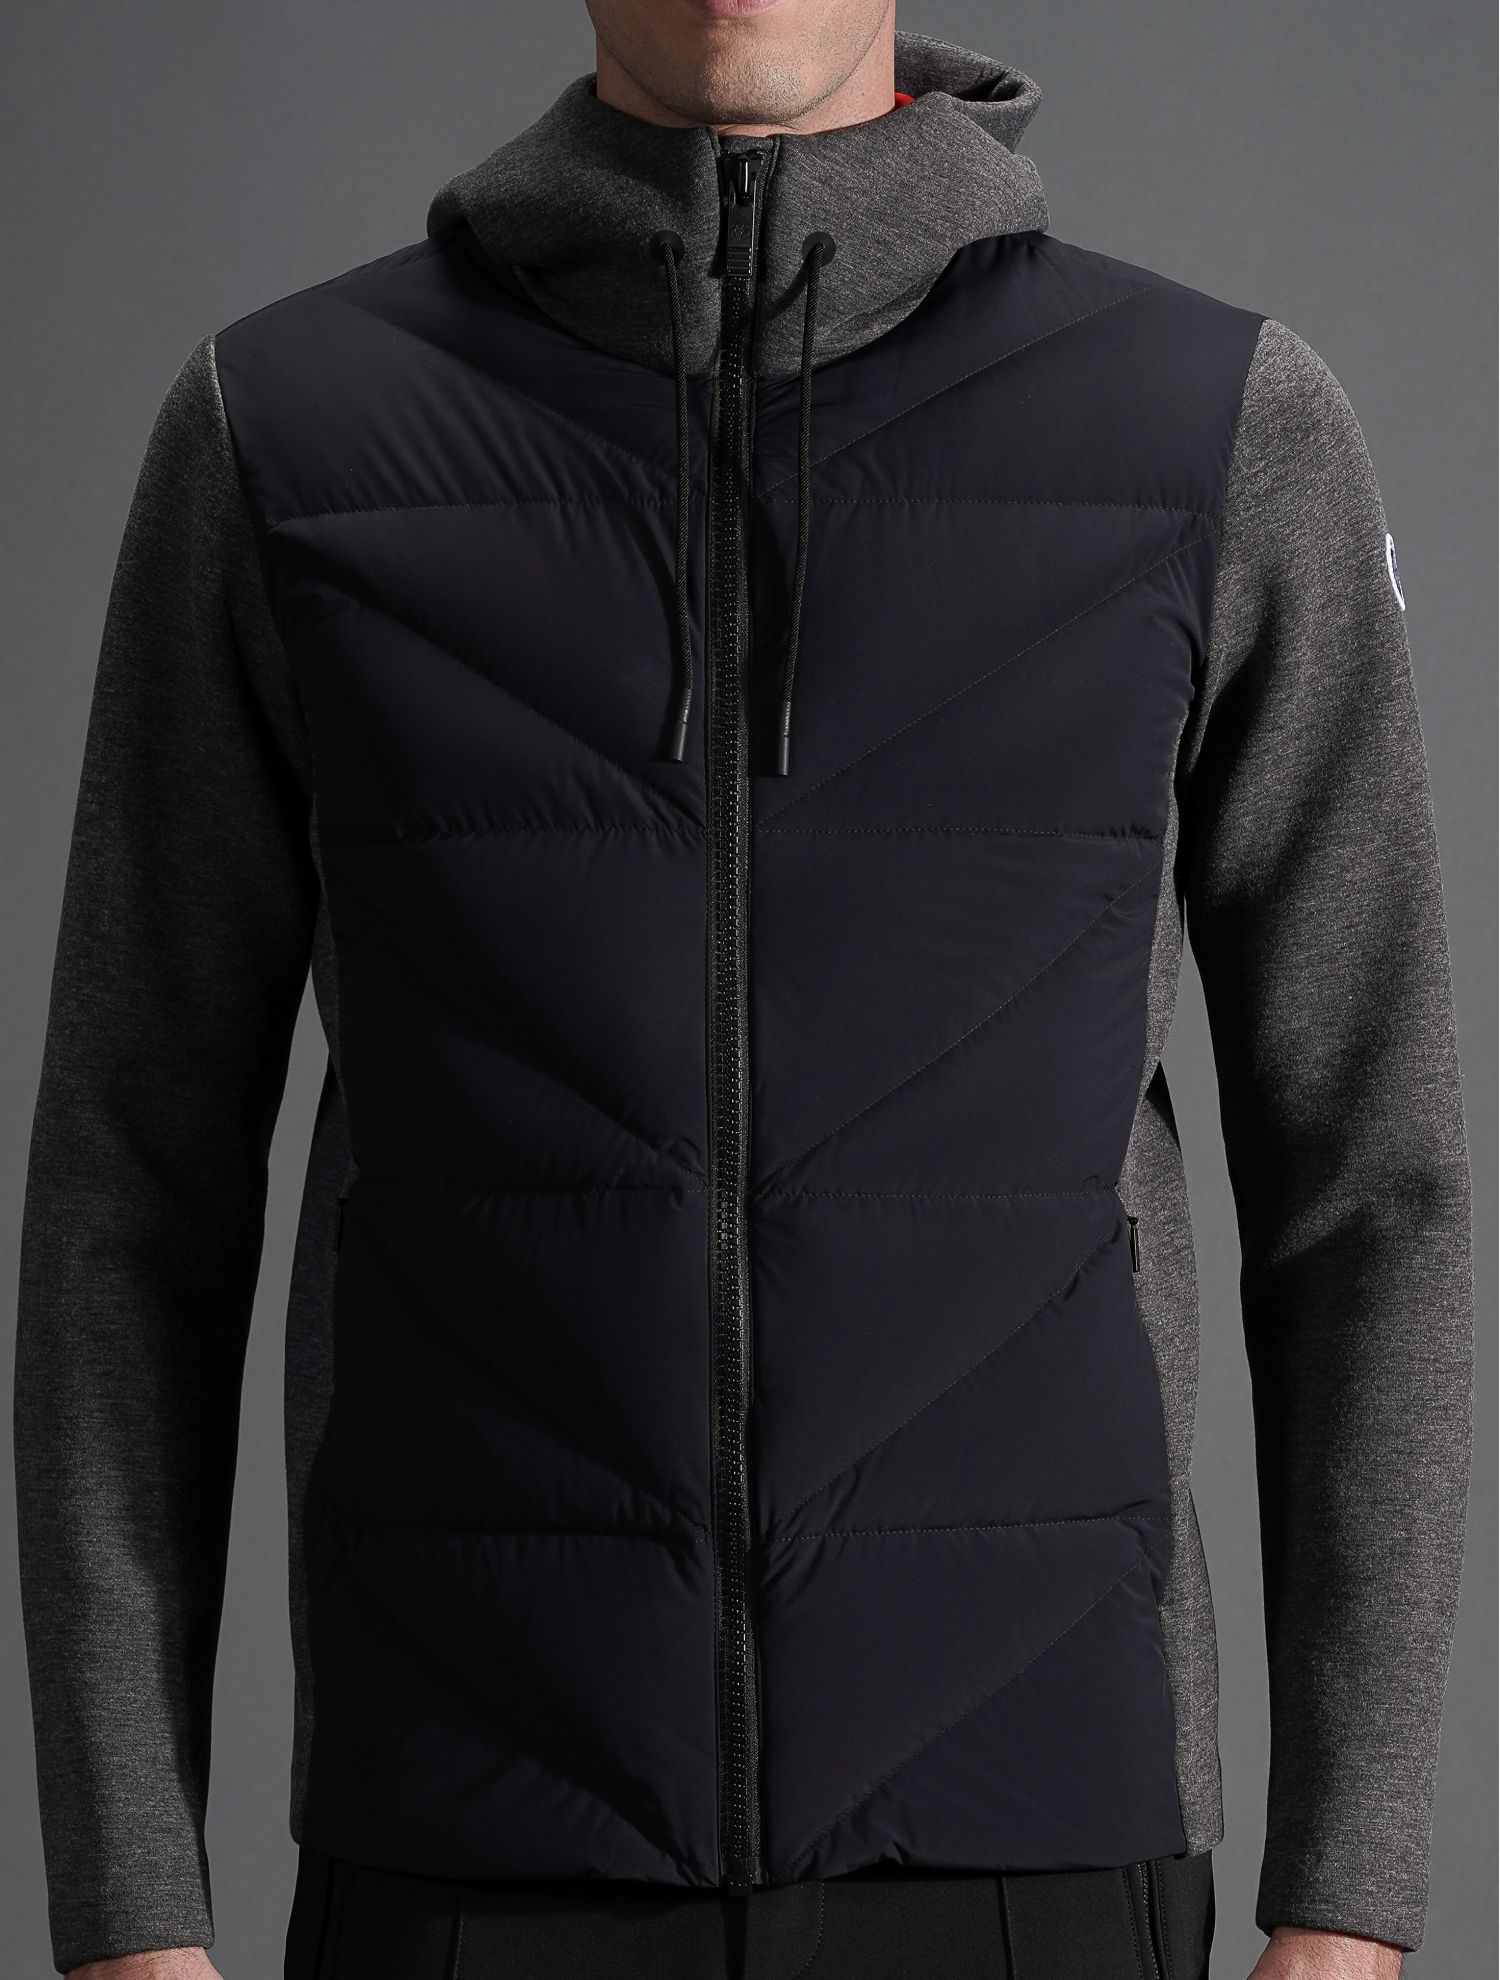 Robson jacket : Zipped hooded jacket with fleece sleeves for men